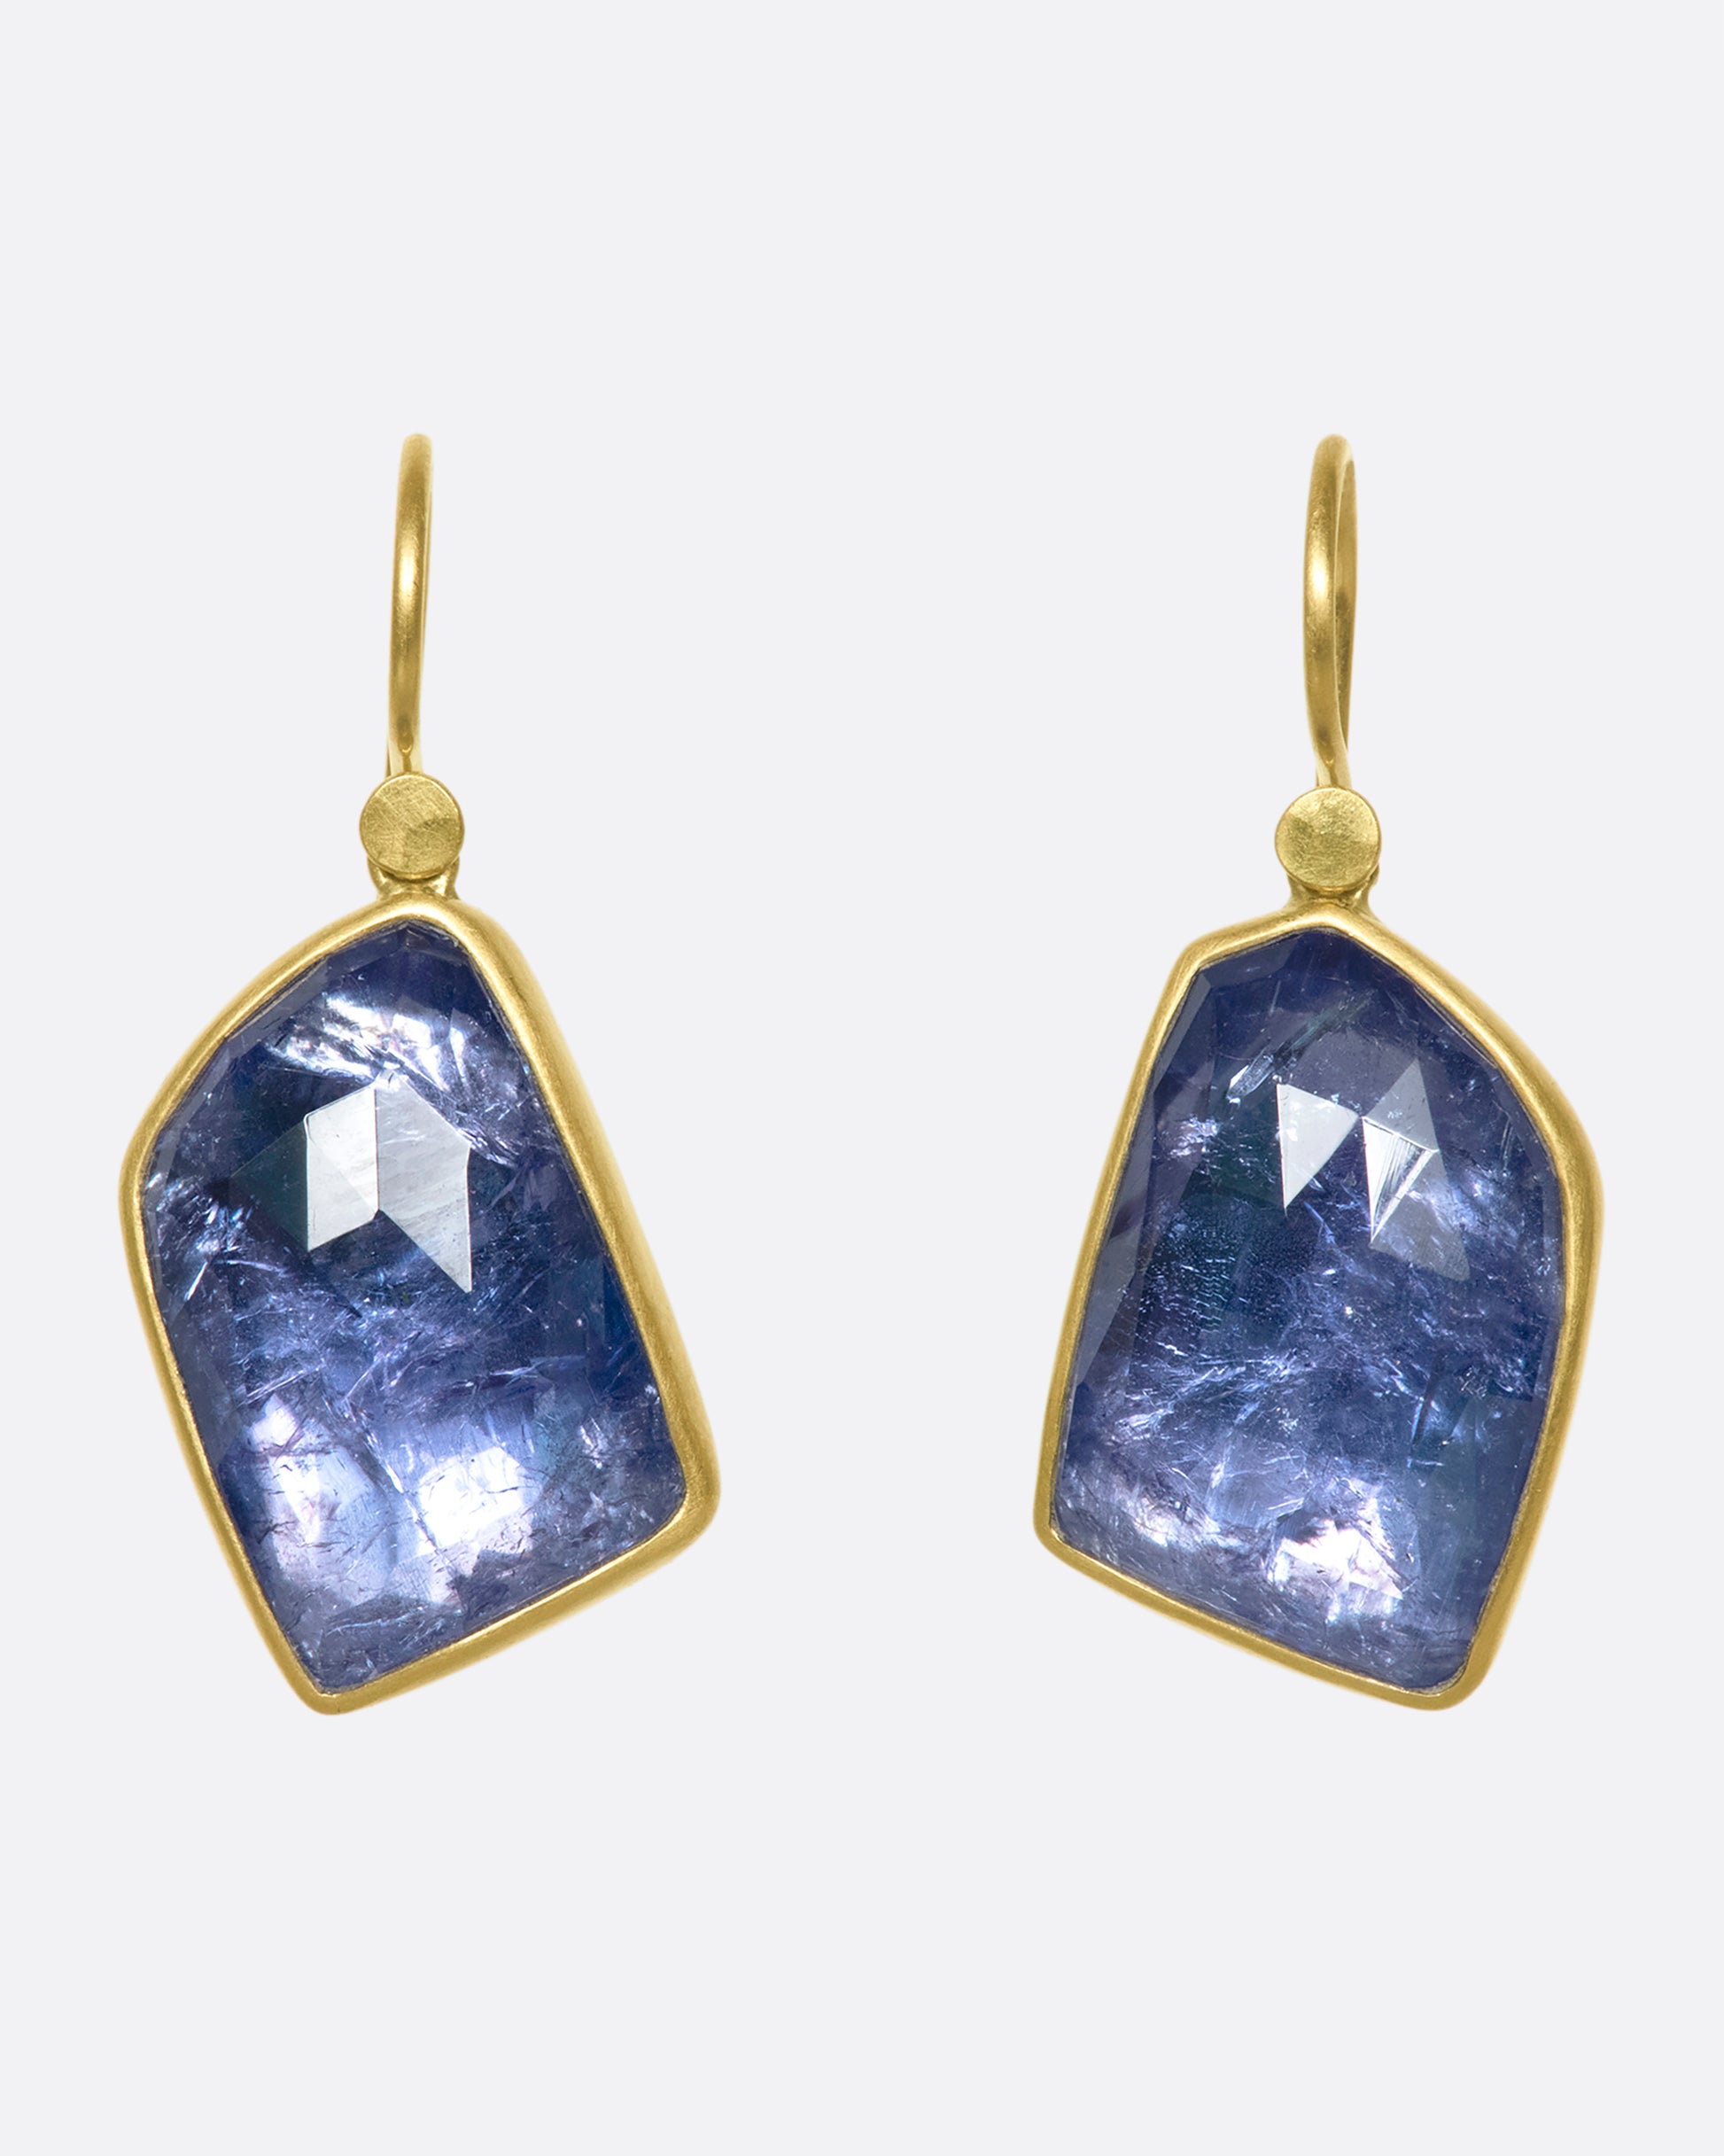 These rose cut asymmetrical tanzanite drop earrings have incredible movement within the stones and change with the light.